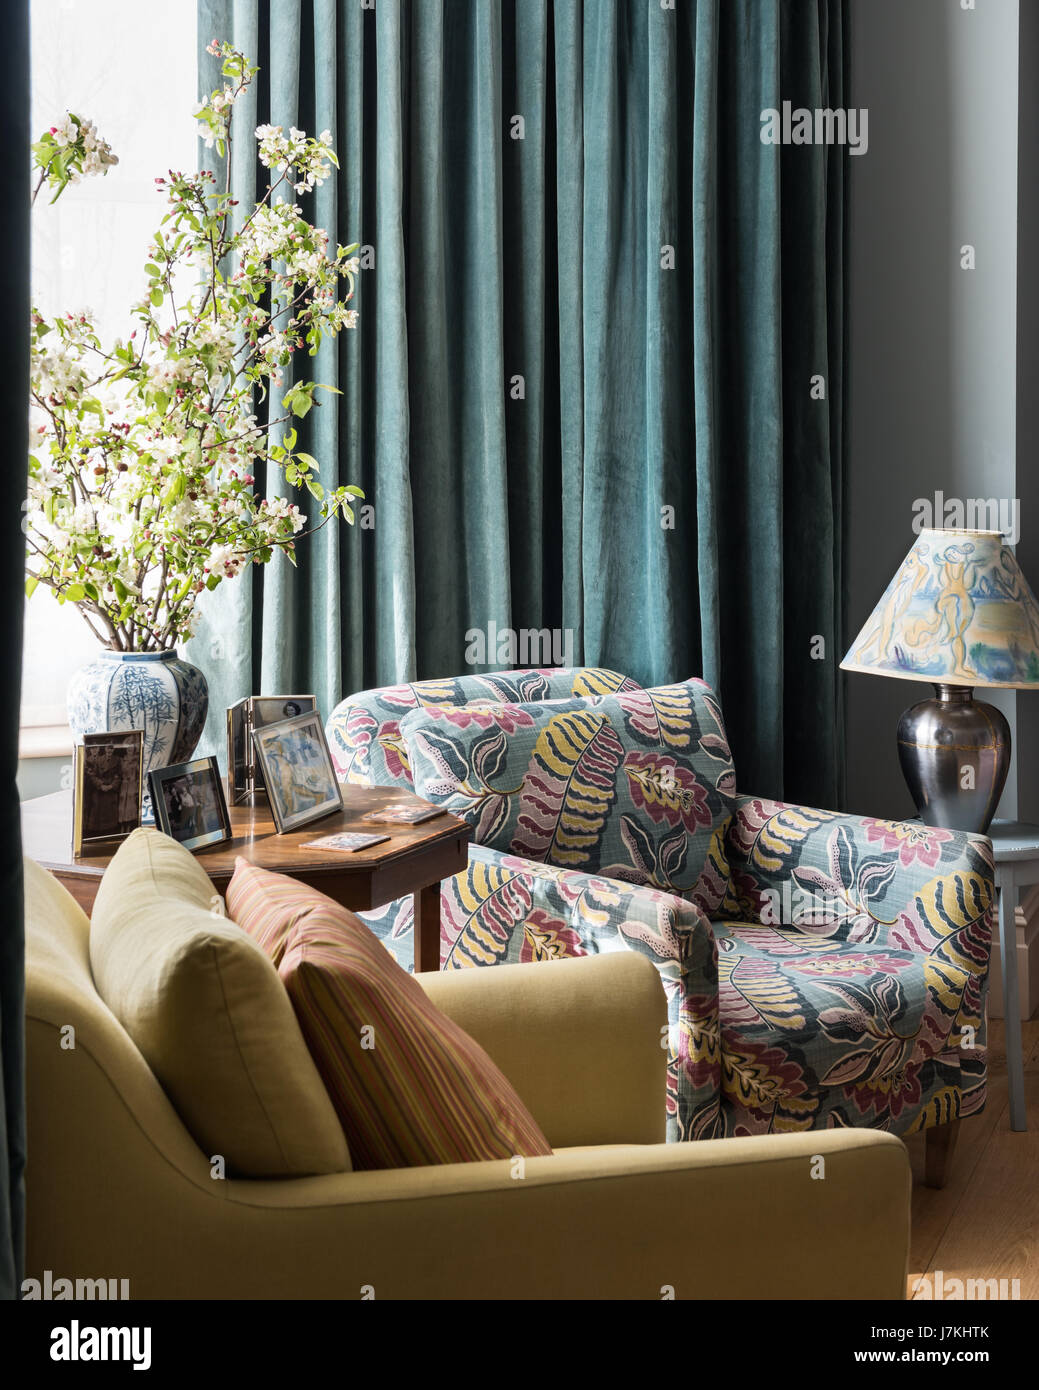 Leaf patterned upholstered armchair in sitting room with floor length teal curtains Stock Photo